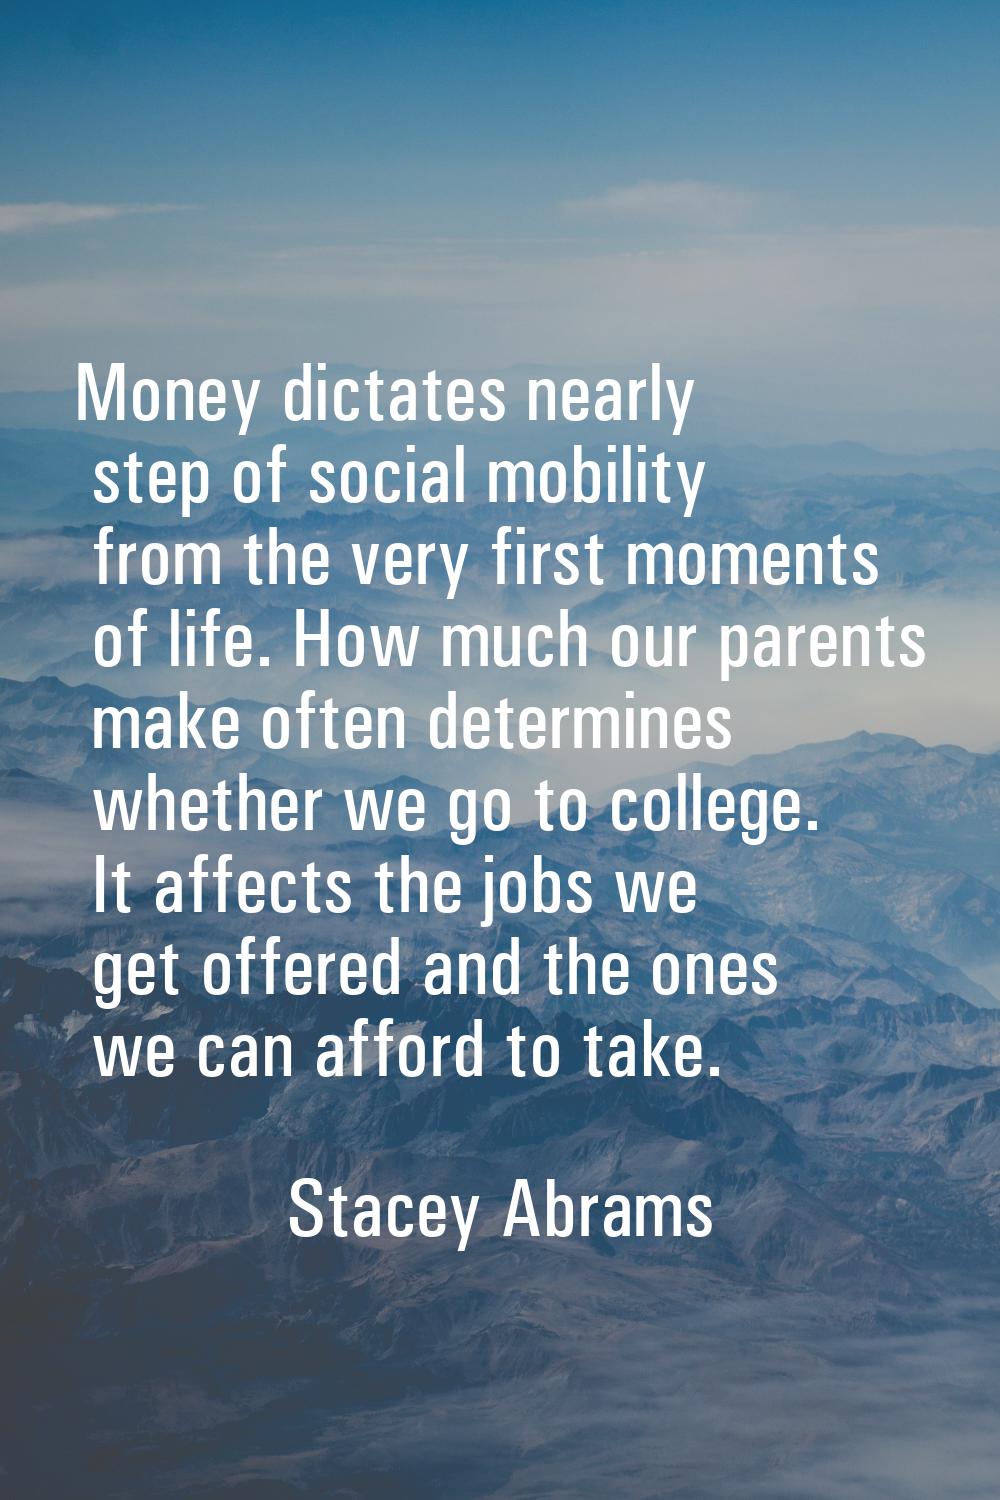 Money dictates nearly step of social mobility from the very first moments of life. How much our par